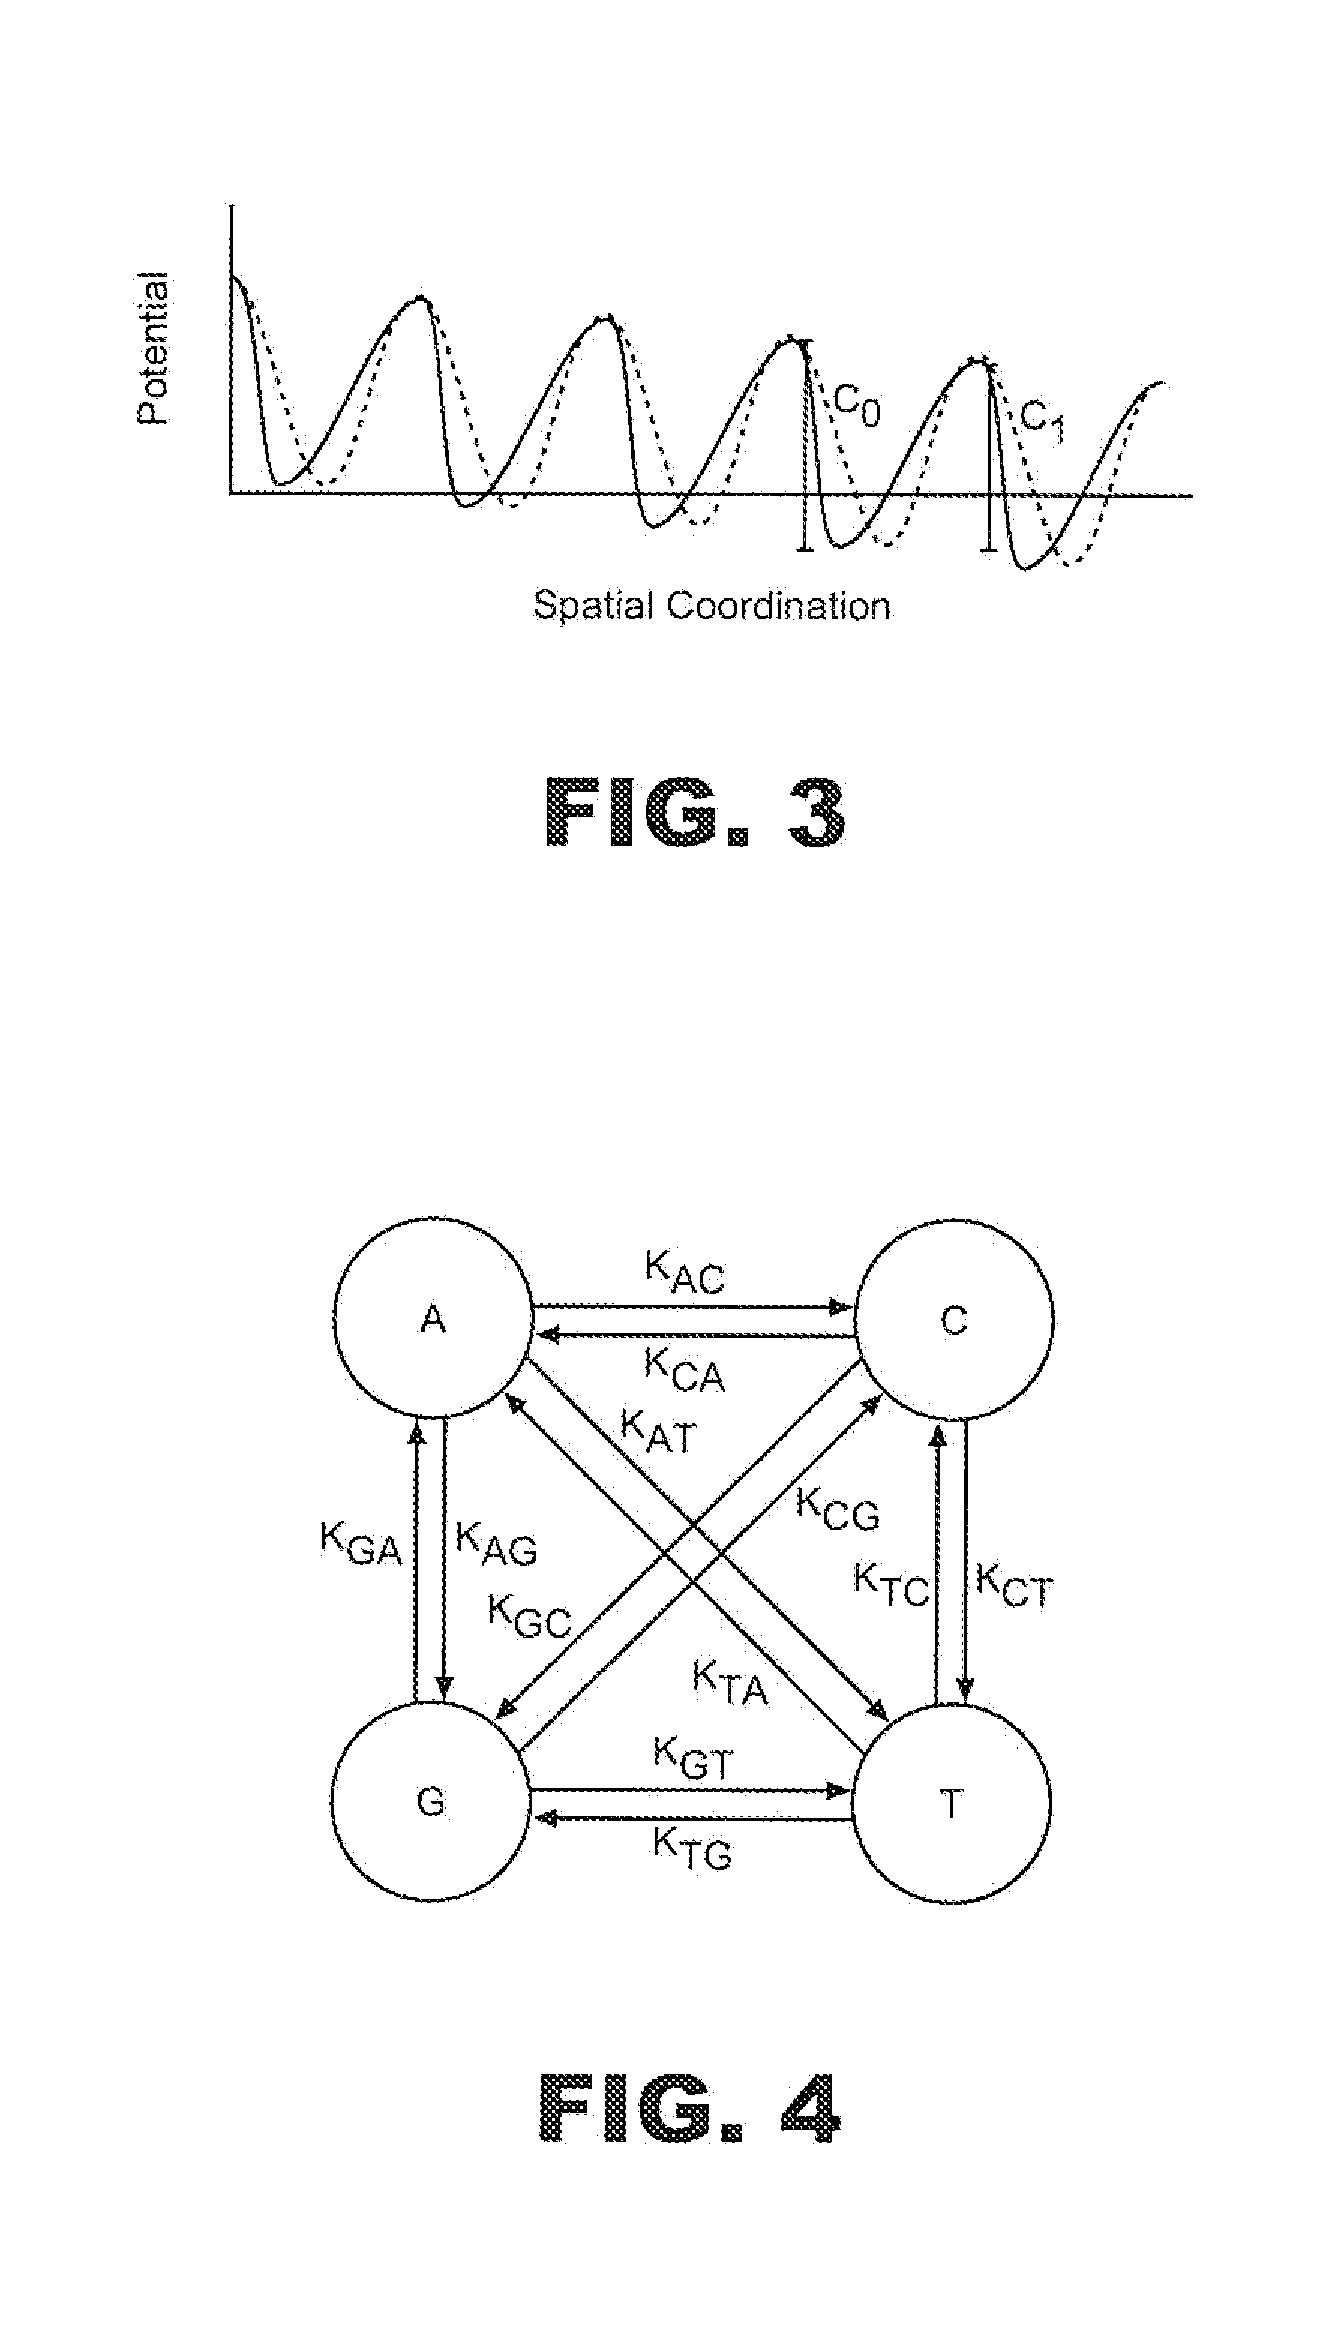 Method for deducing a polymer sequence from a nominal base-by-base measurement